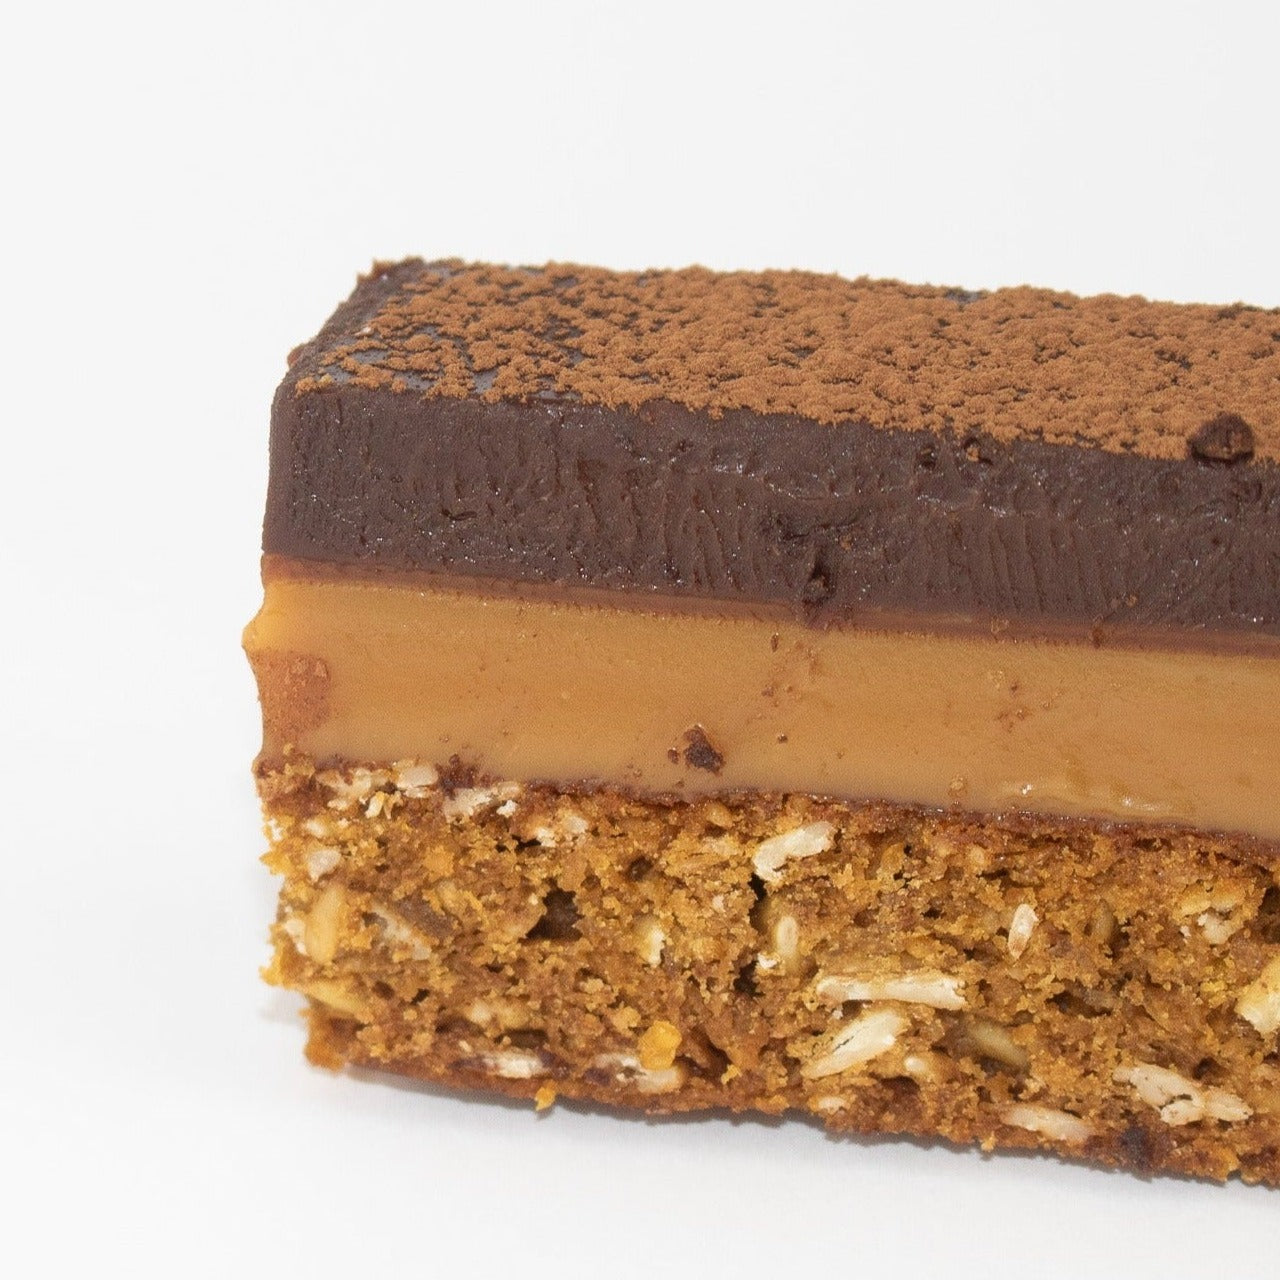 Close up image of a 3 layer slice. the bottom layer is an oaty biscuit. the middle layer is caramel. and at the top there is a thick layer of chocolate ganache